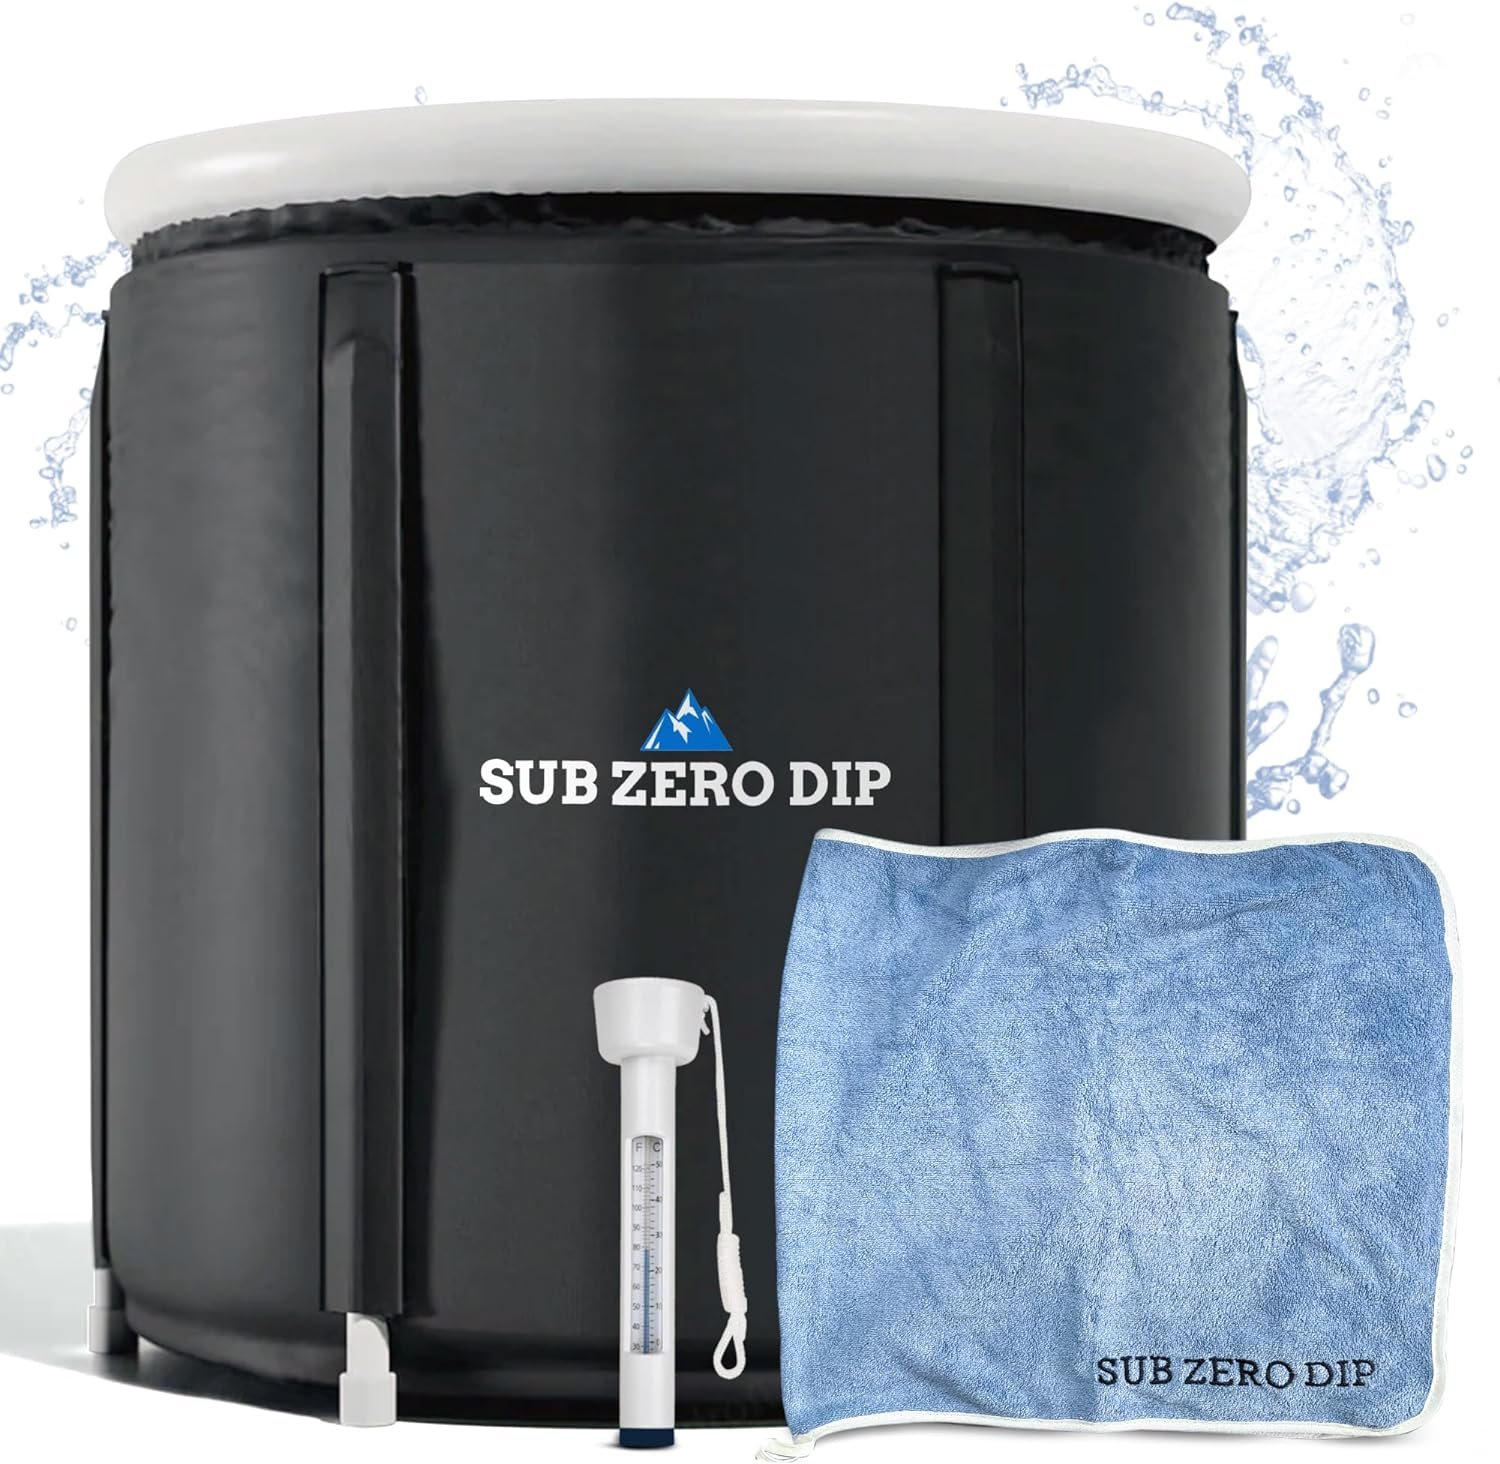 Outdoor XL Cold Plunge Tub Kit review